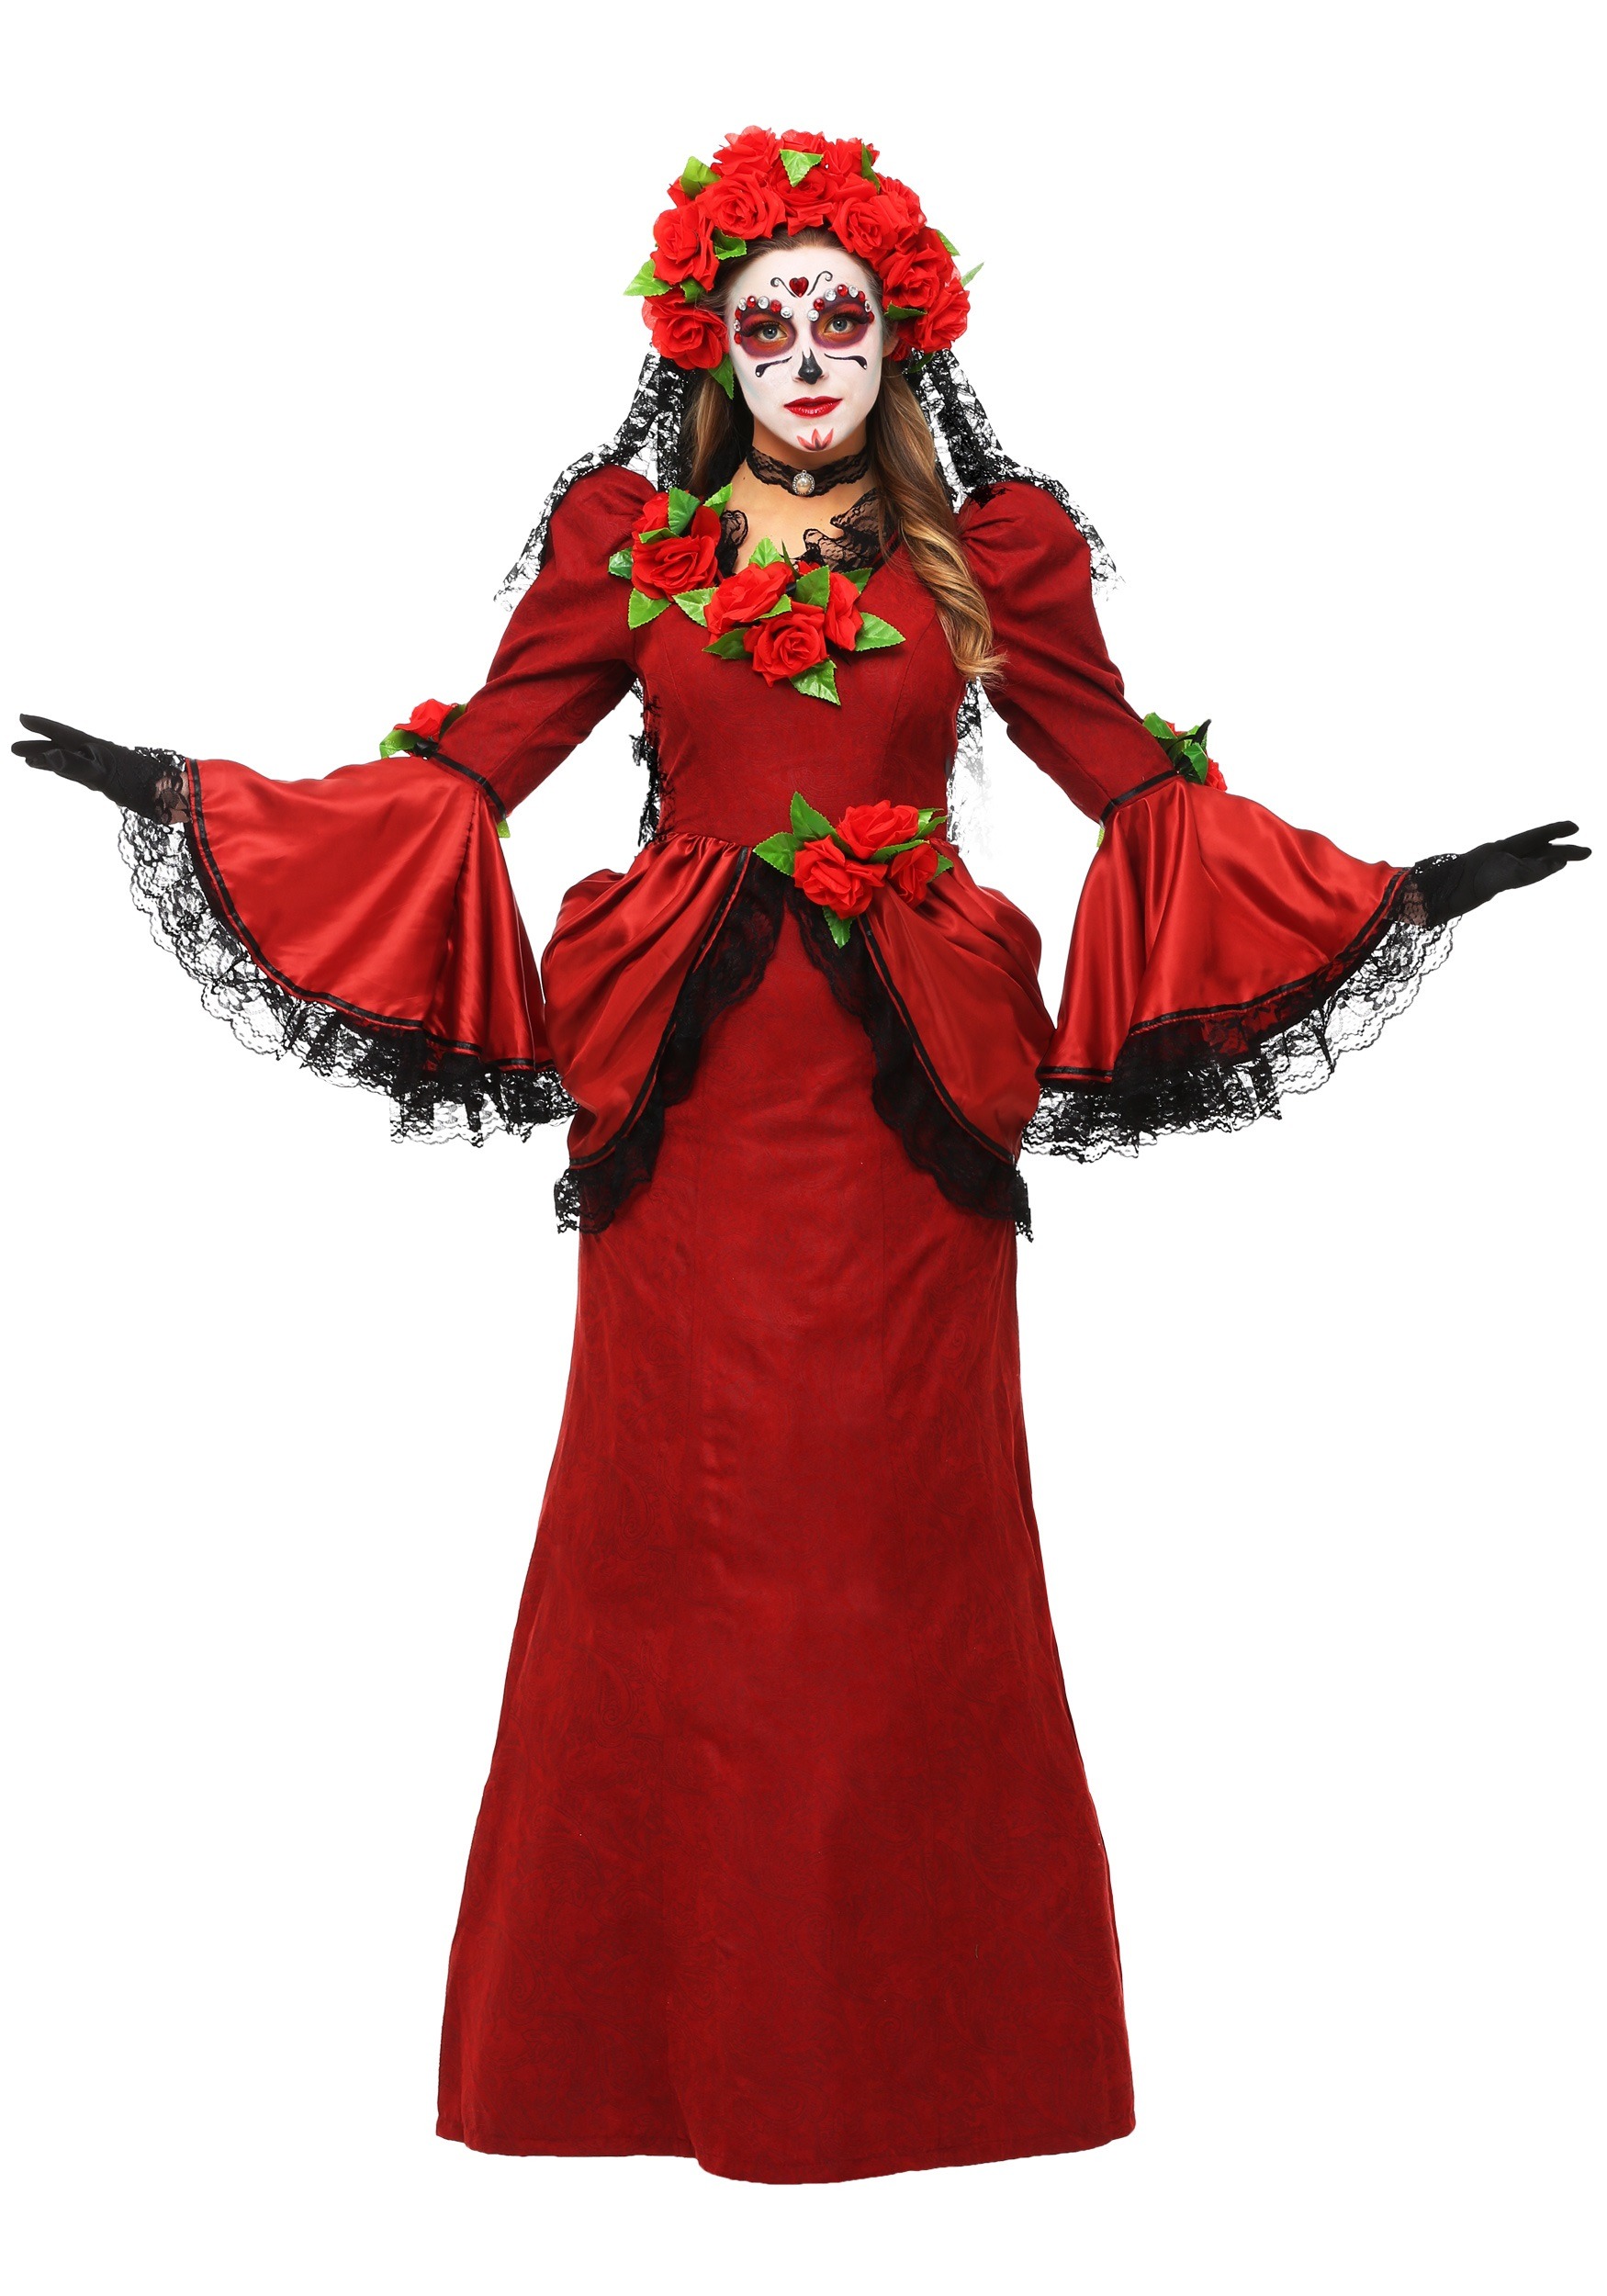 Photos - Fancy Dress FUN Costumes Plus Size Women's Day of the Dead Costume Black/Red FUN11